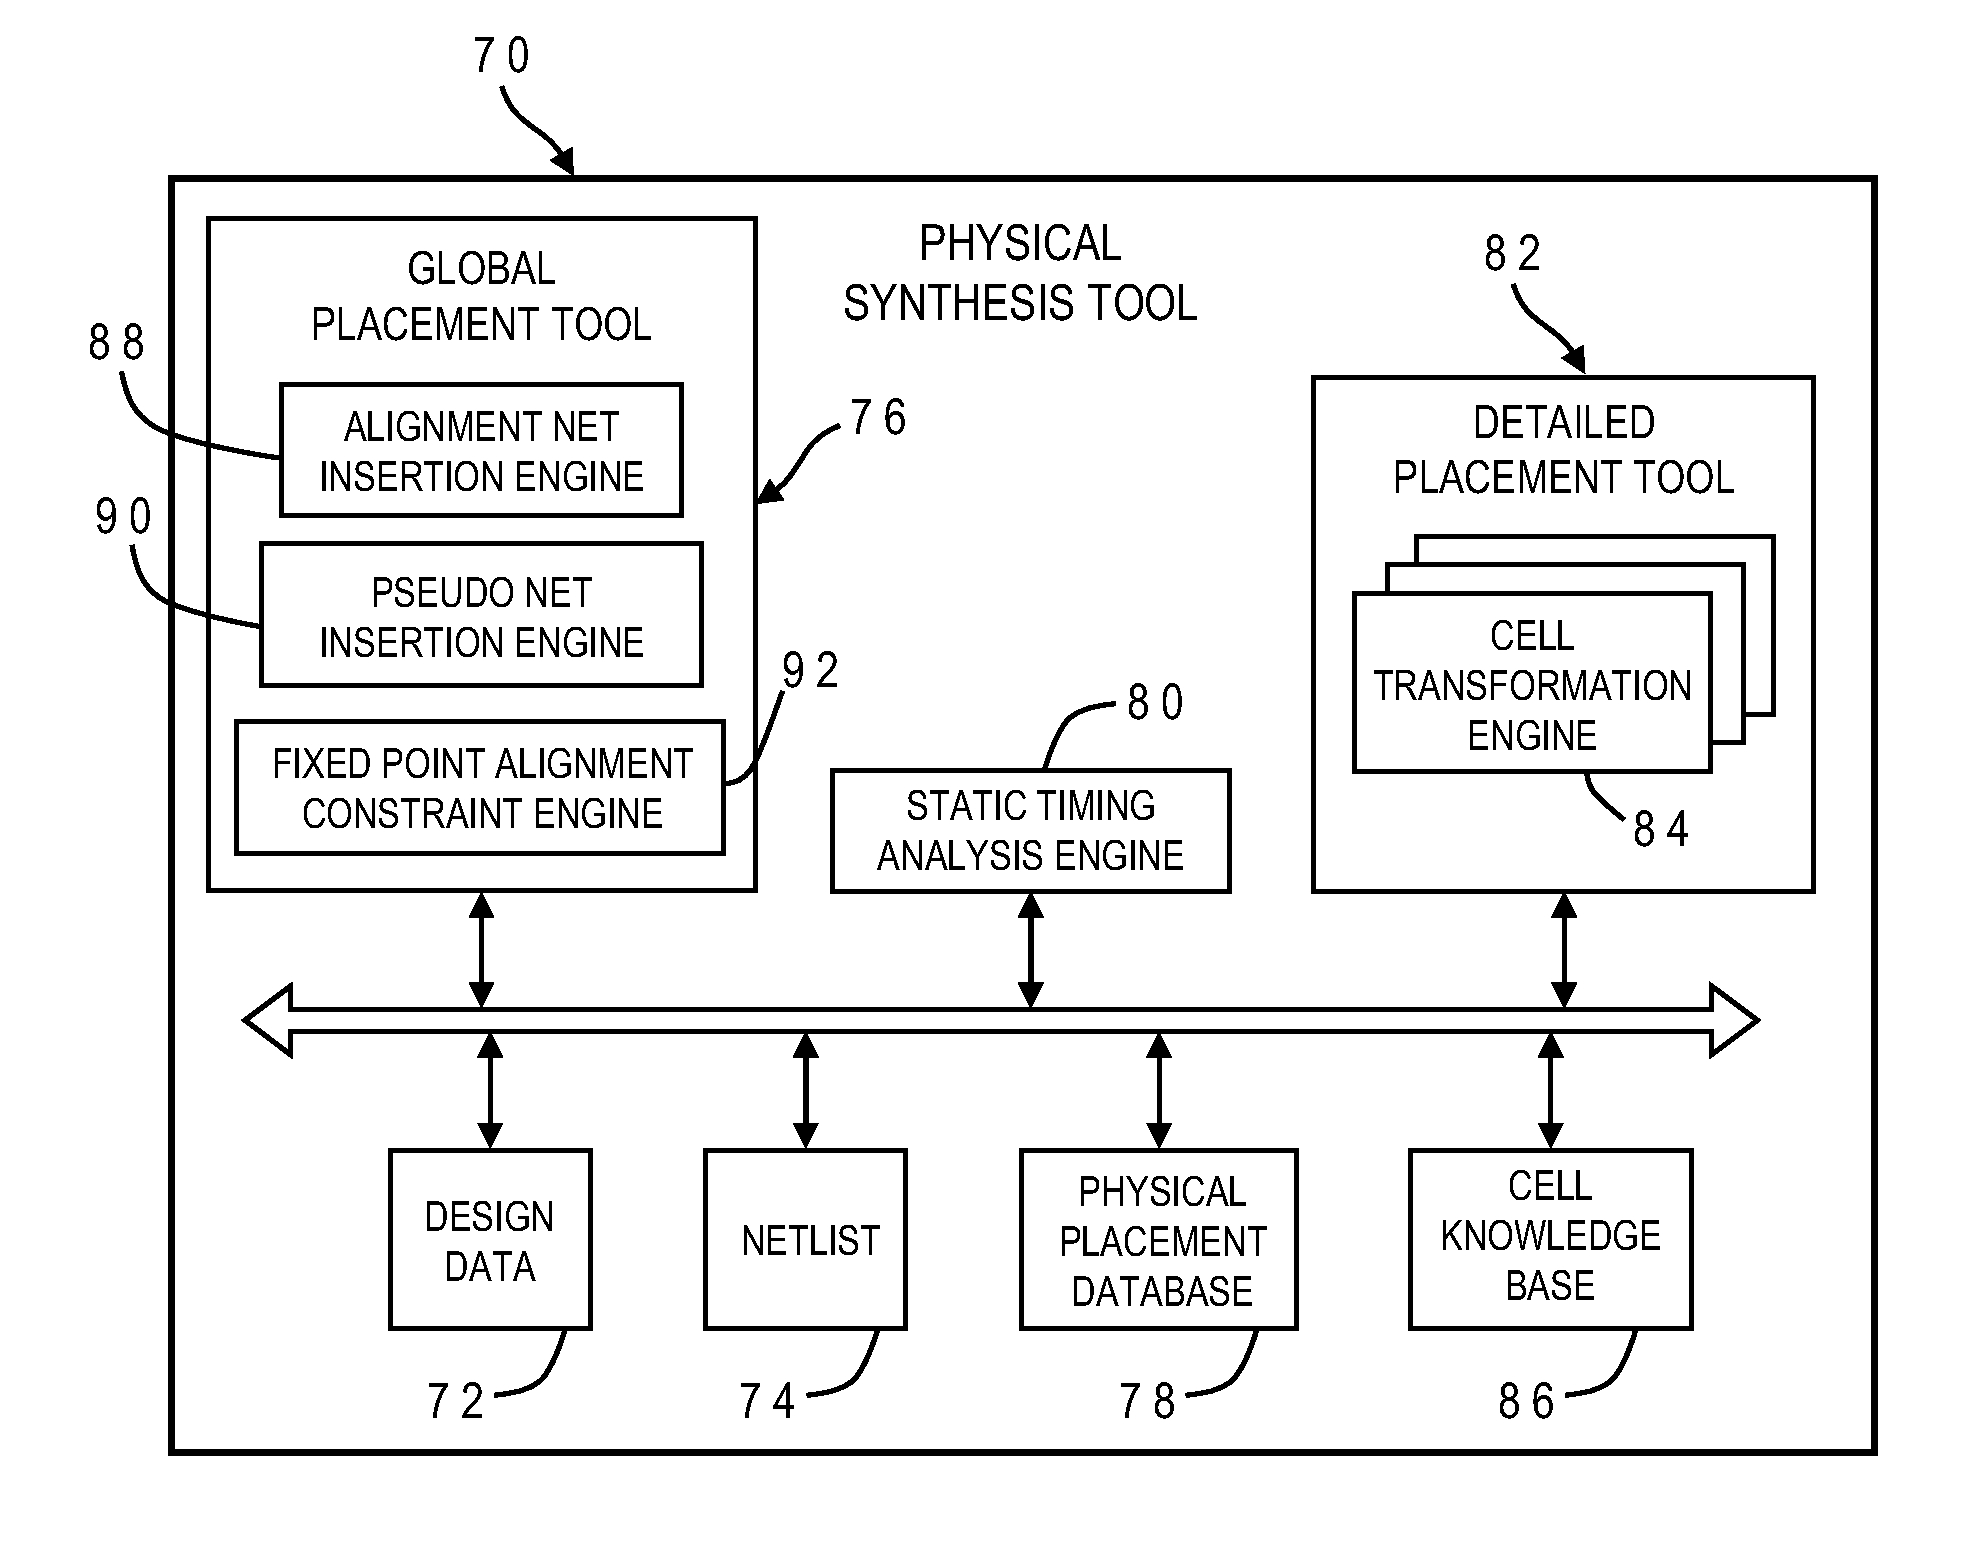 Alignment net insertion for straightening the datapath in a force-directed placer